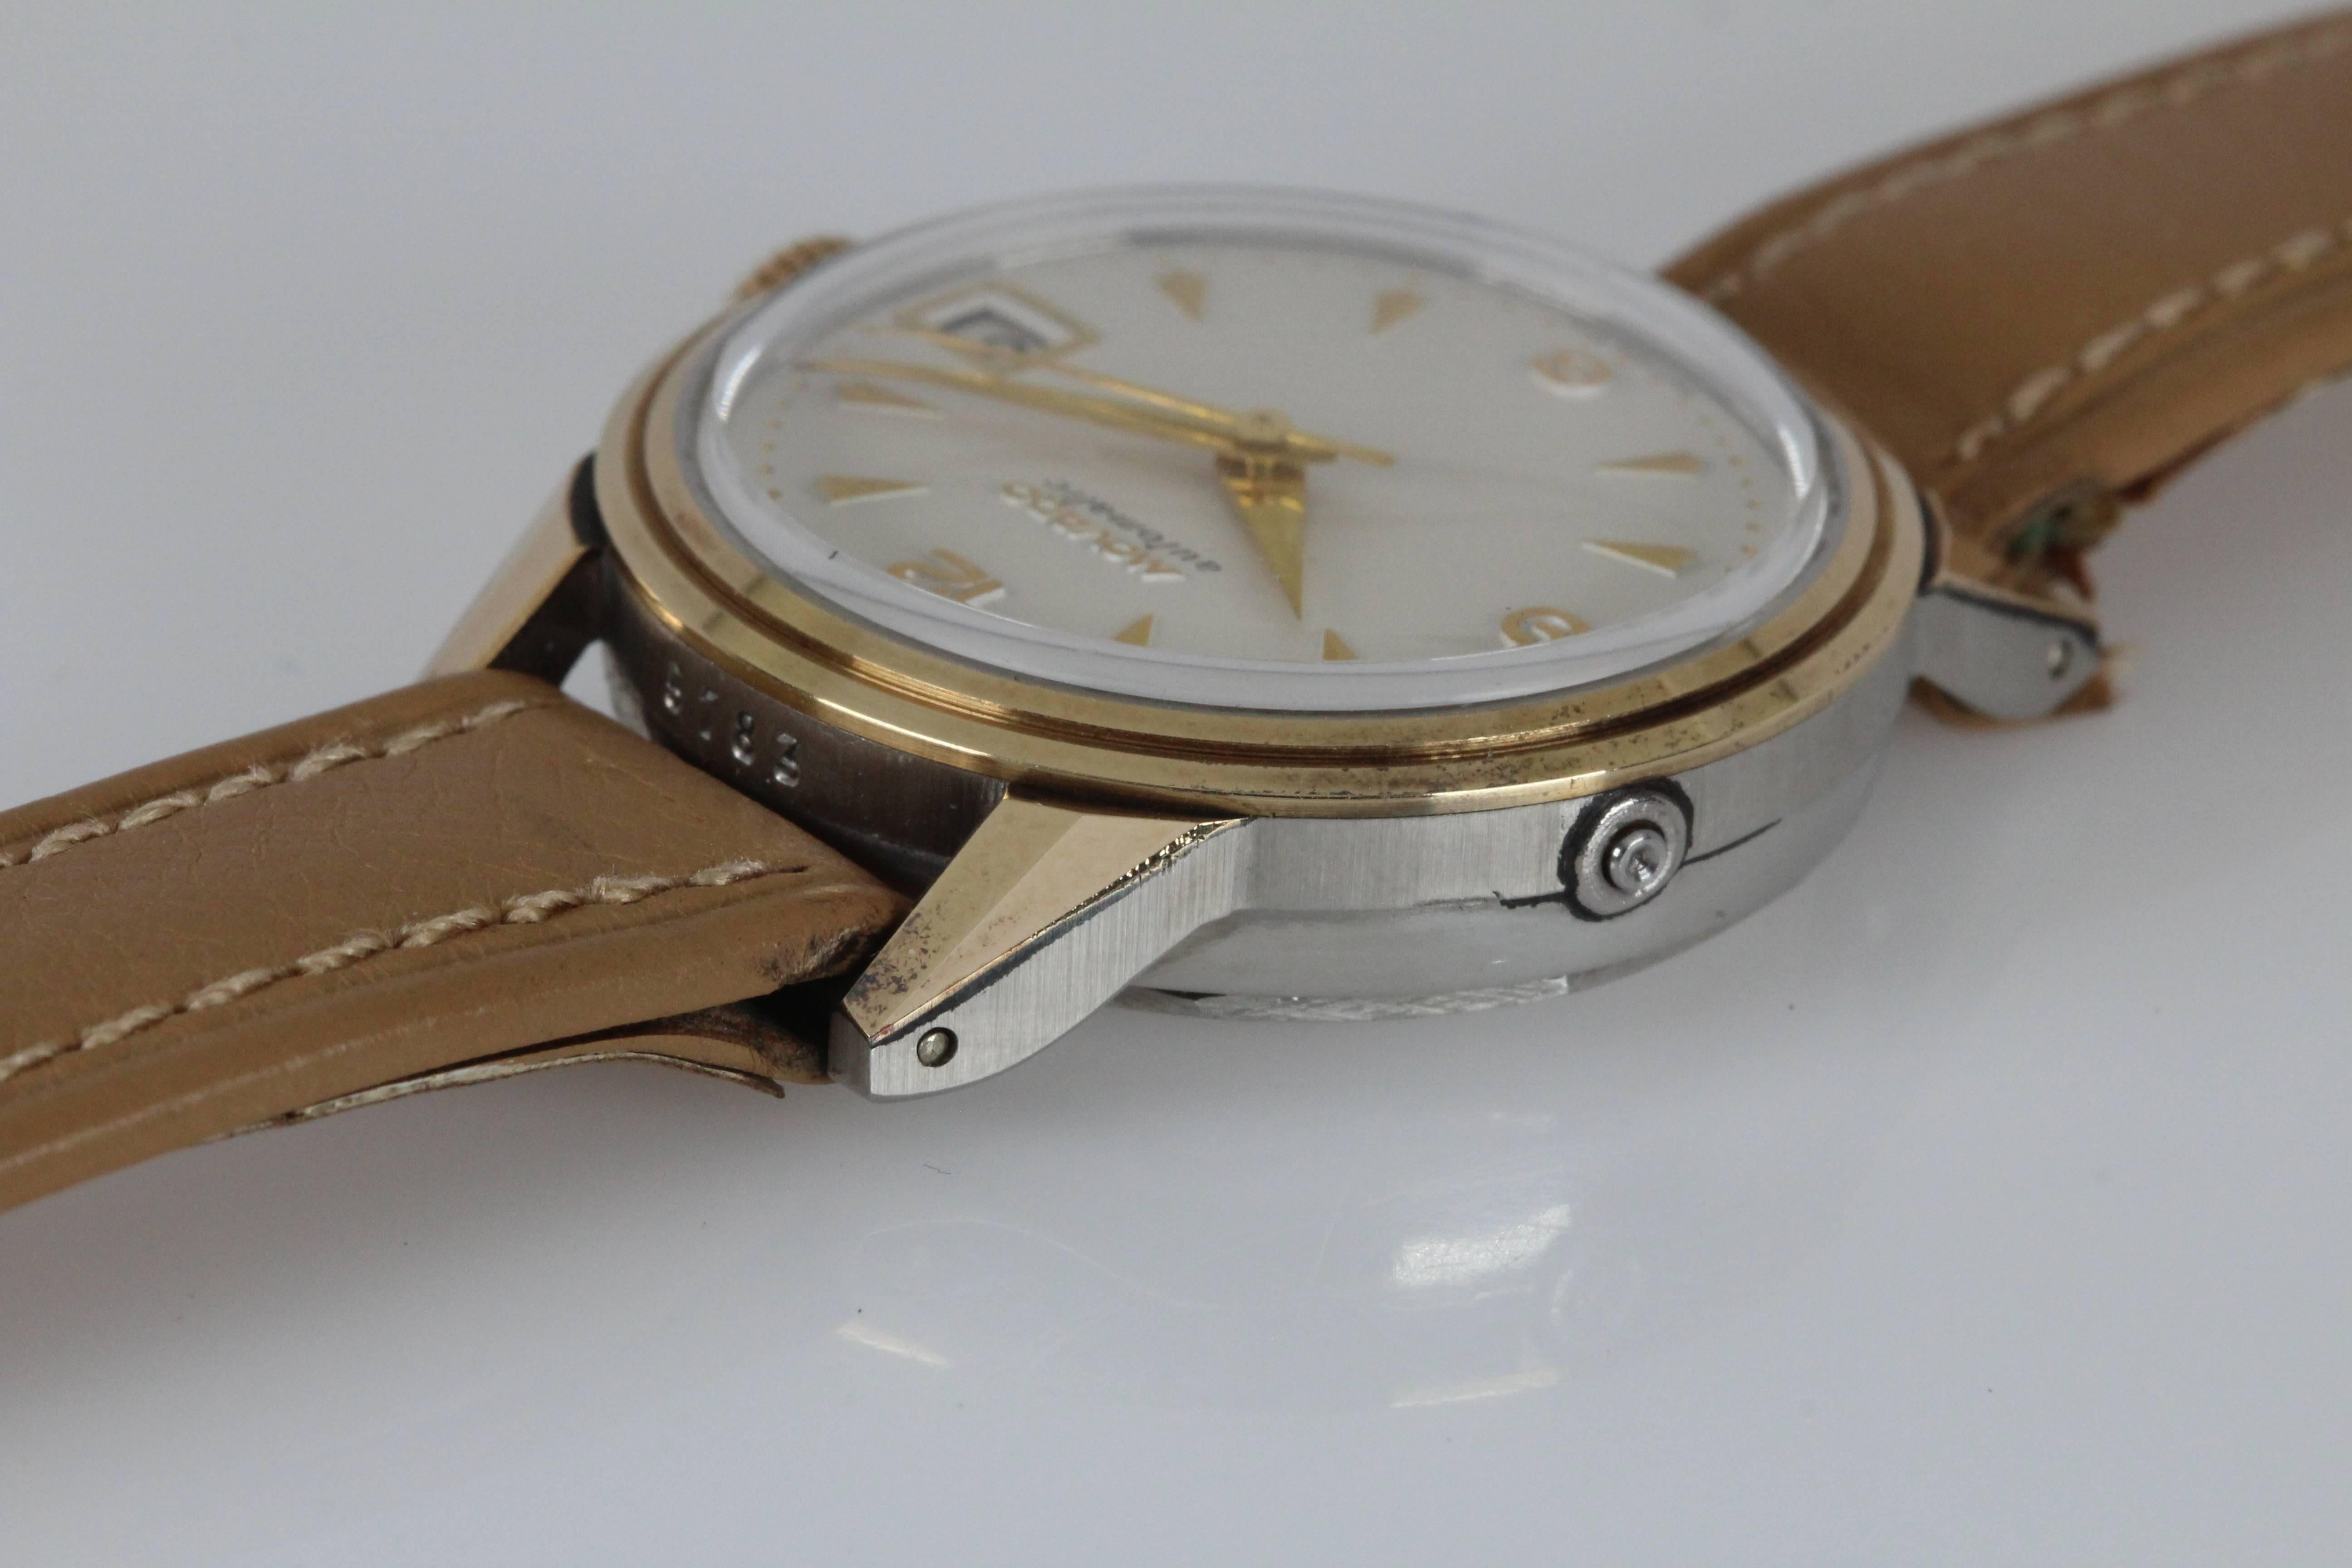 Men's Movado Gold-Plated Automatic Wristwatch, circa 1950s